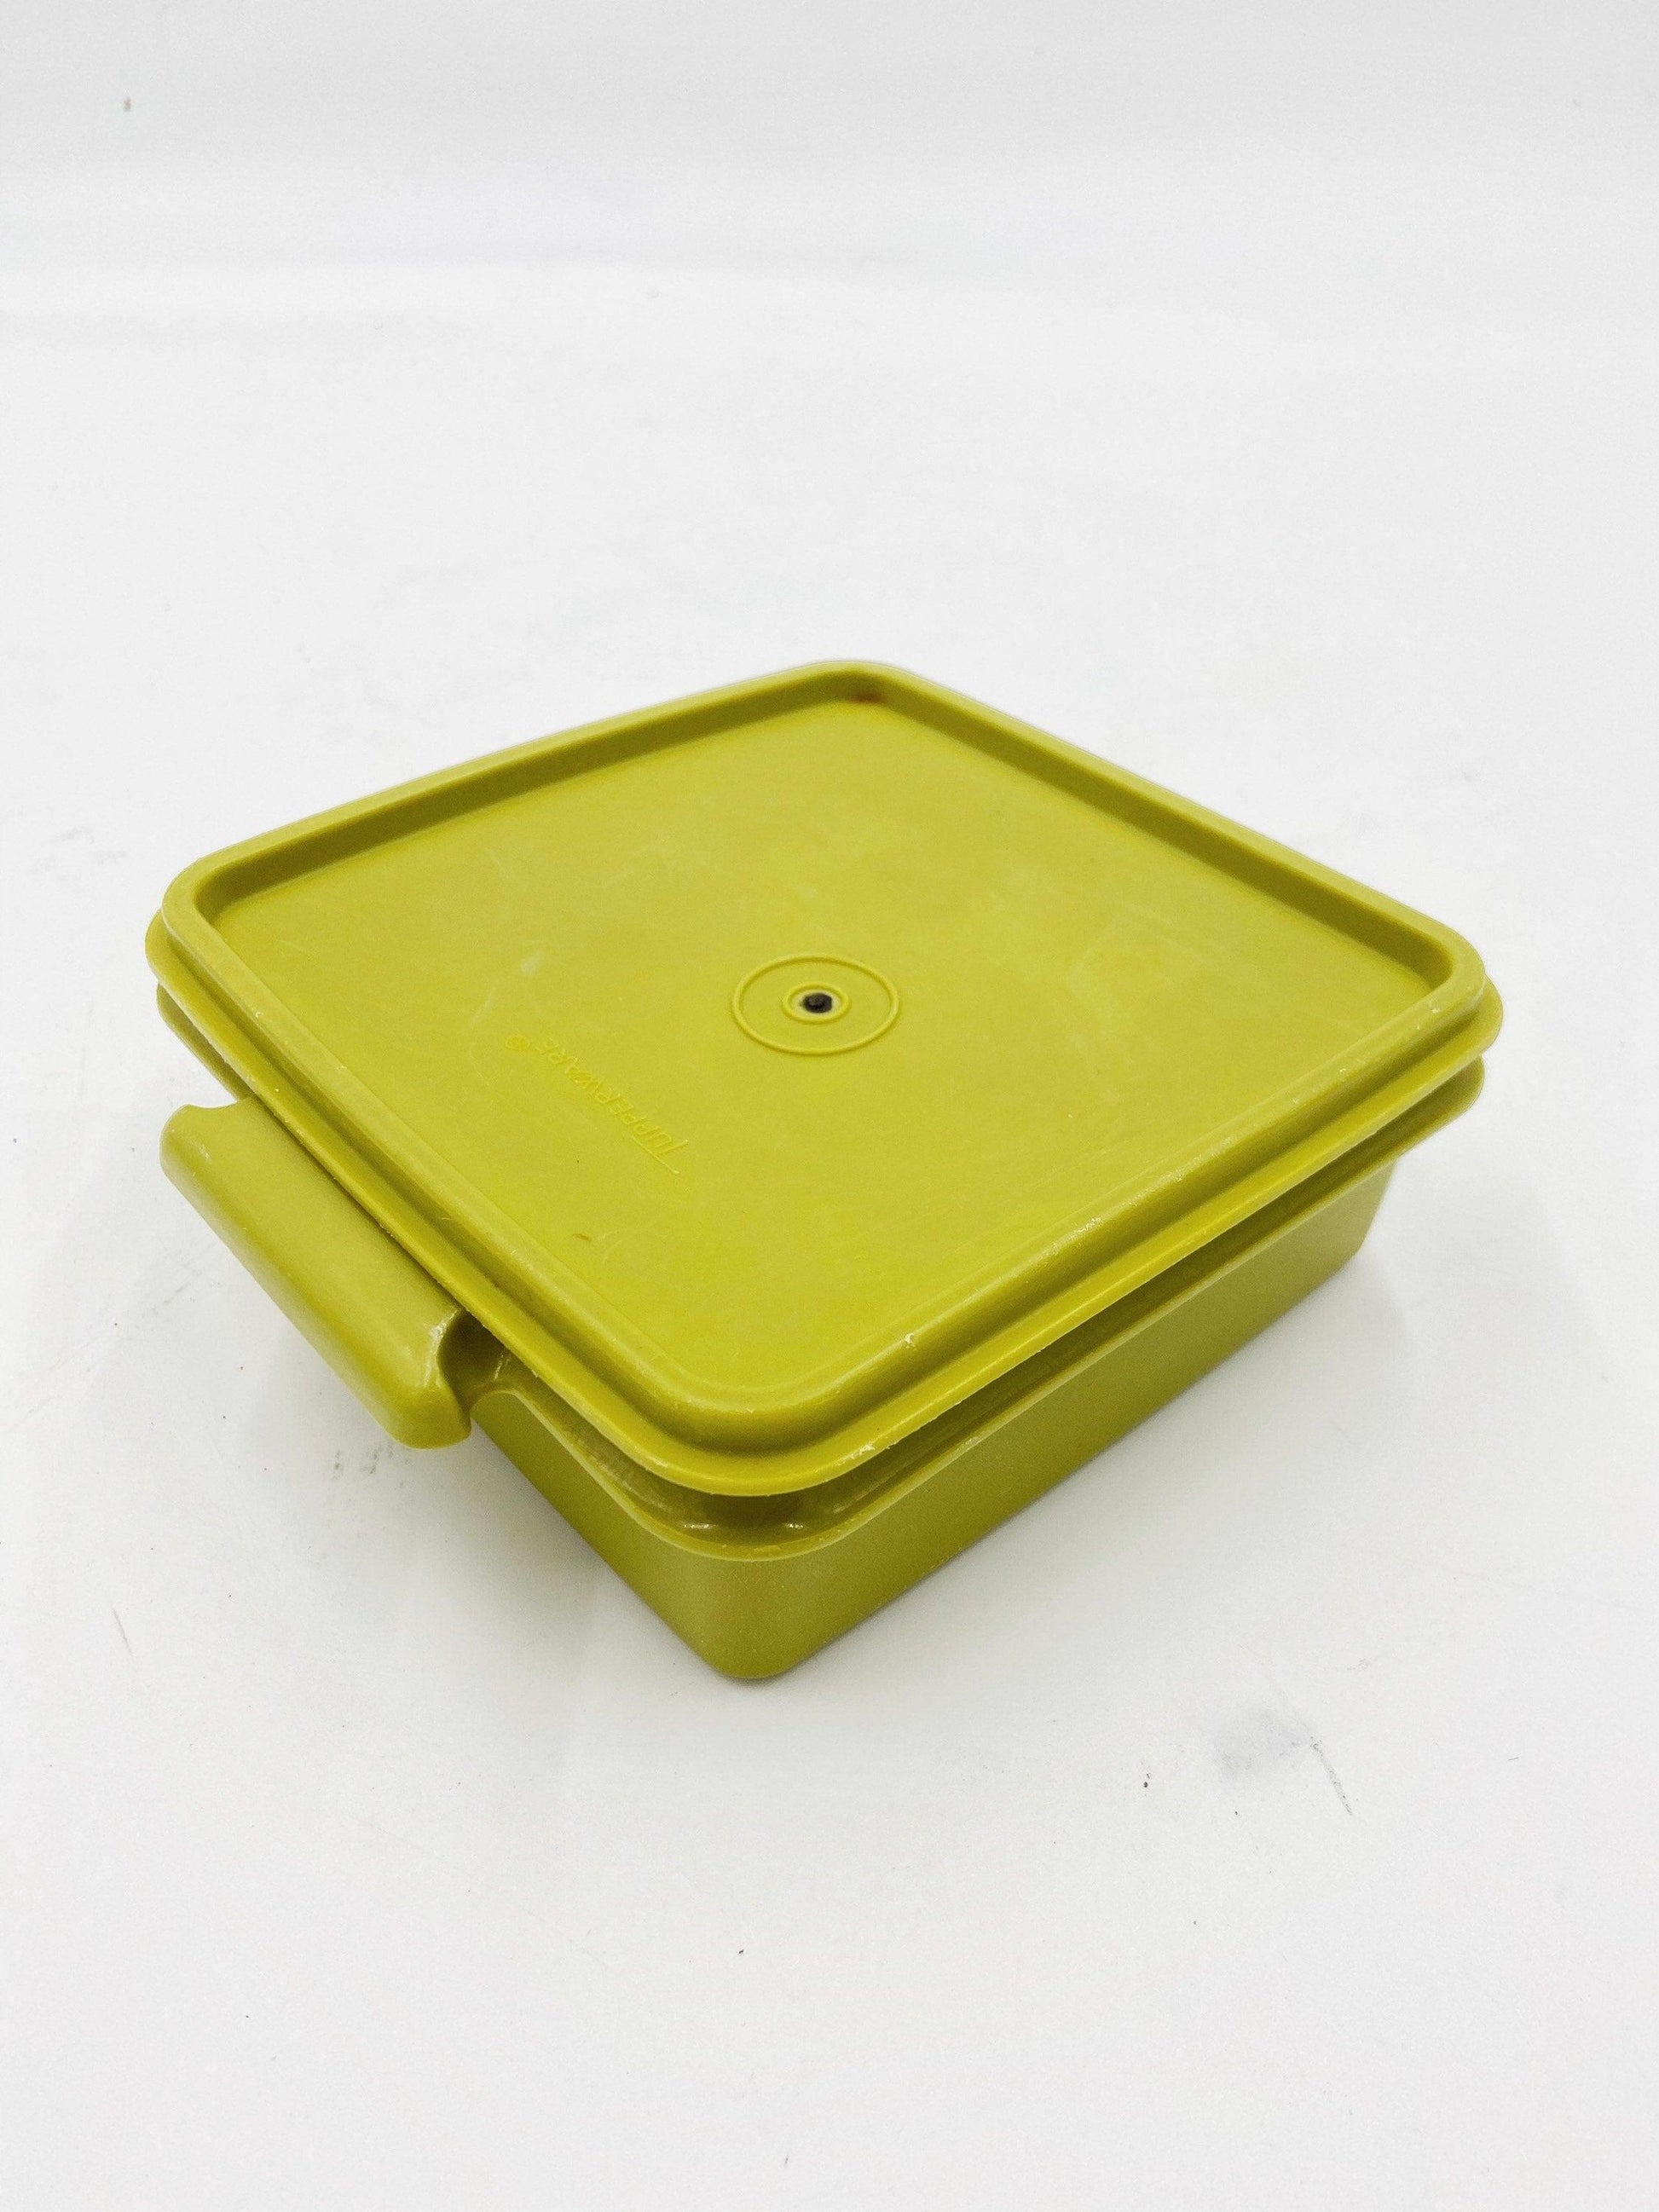 https://funkyhousevintage.com/cdn/shop/files/vintage-green-tupperware-square-stacking-bowl-antique-tupper-ware-food-storage-retro-kitchen-mid-century-modern-kitchen-decor-1970s-located-at-funkyhouse-vintage-antique-store-weiser_0aa7d38f-8bda-47bf-a72f-1be84326f4cf.jpg?v=1688592983&width=1946